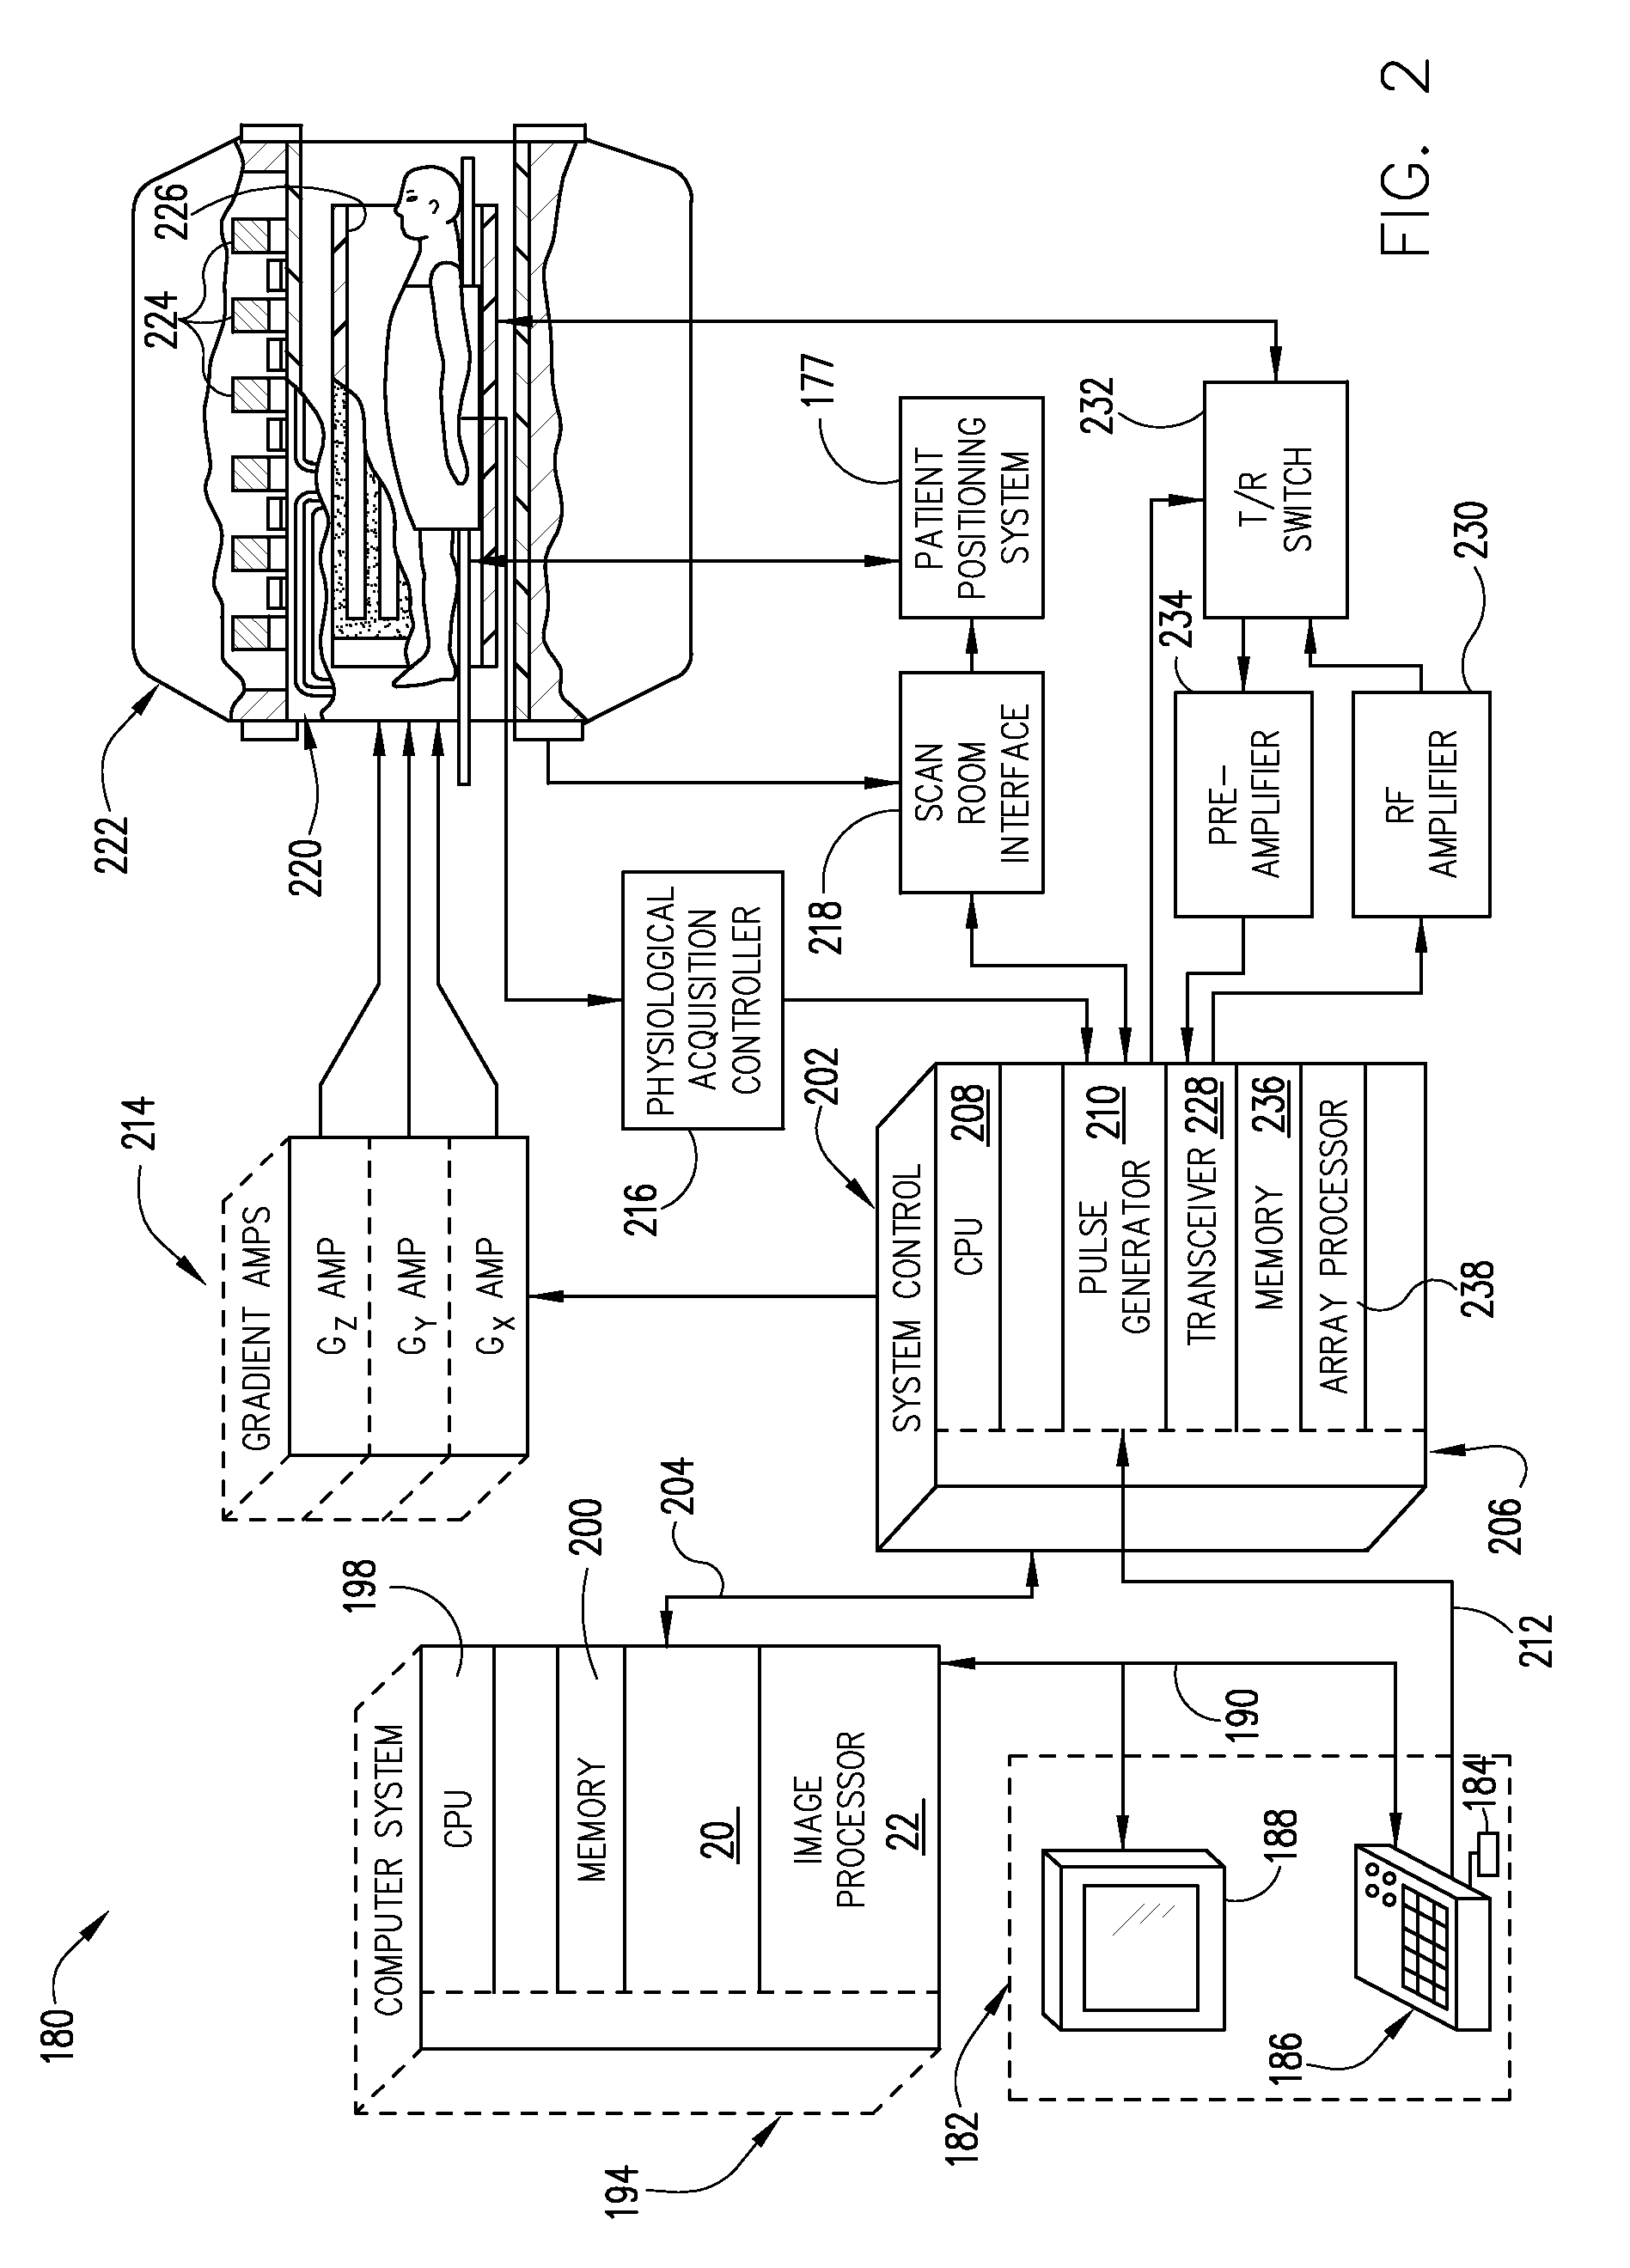 Apparatus and method for isolating a region in an image